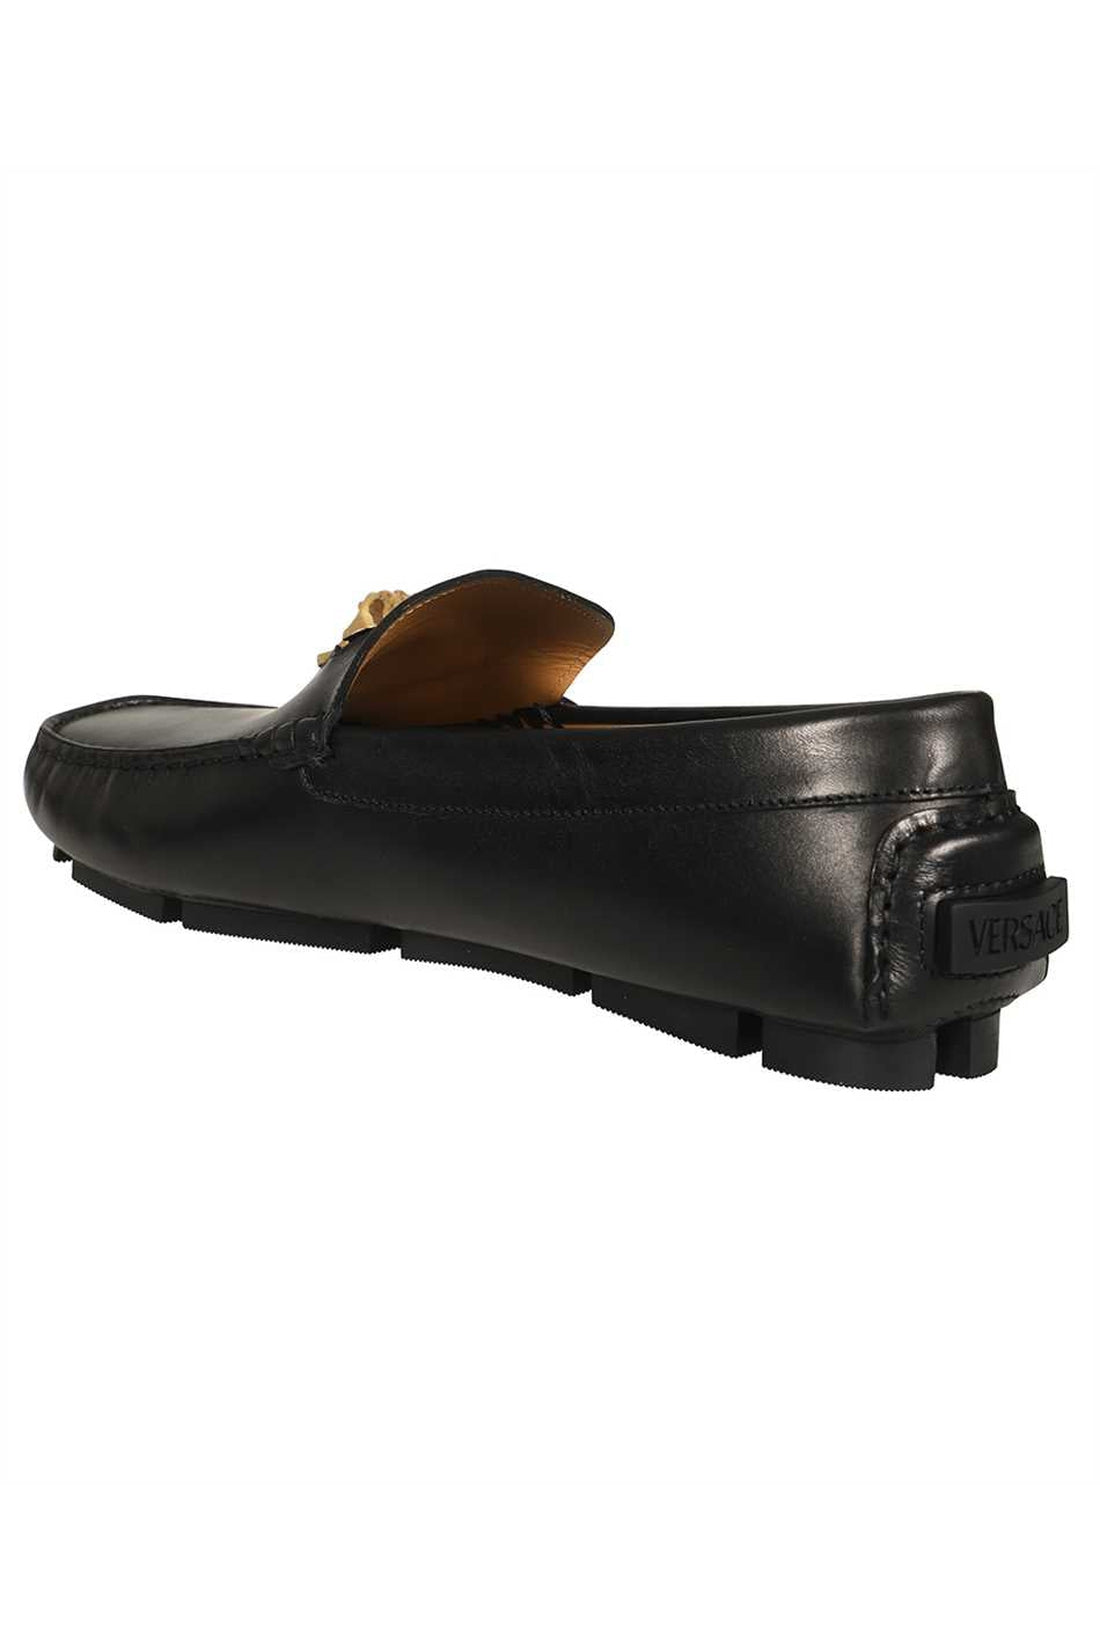 Versace-OUTLET-SALE-Driver leather loafers-ARCHIVIST